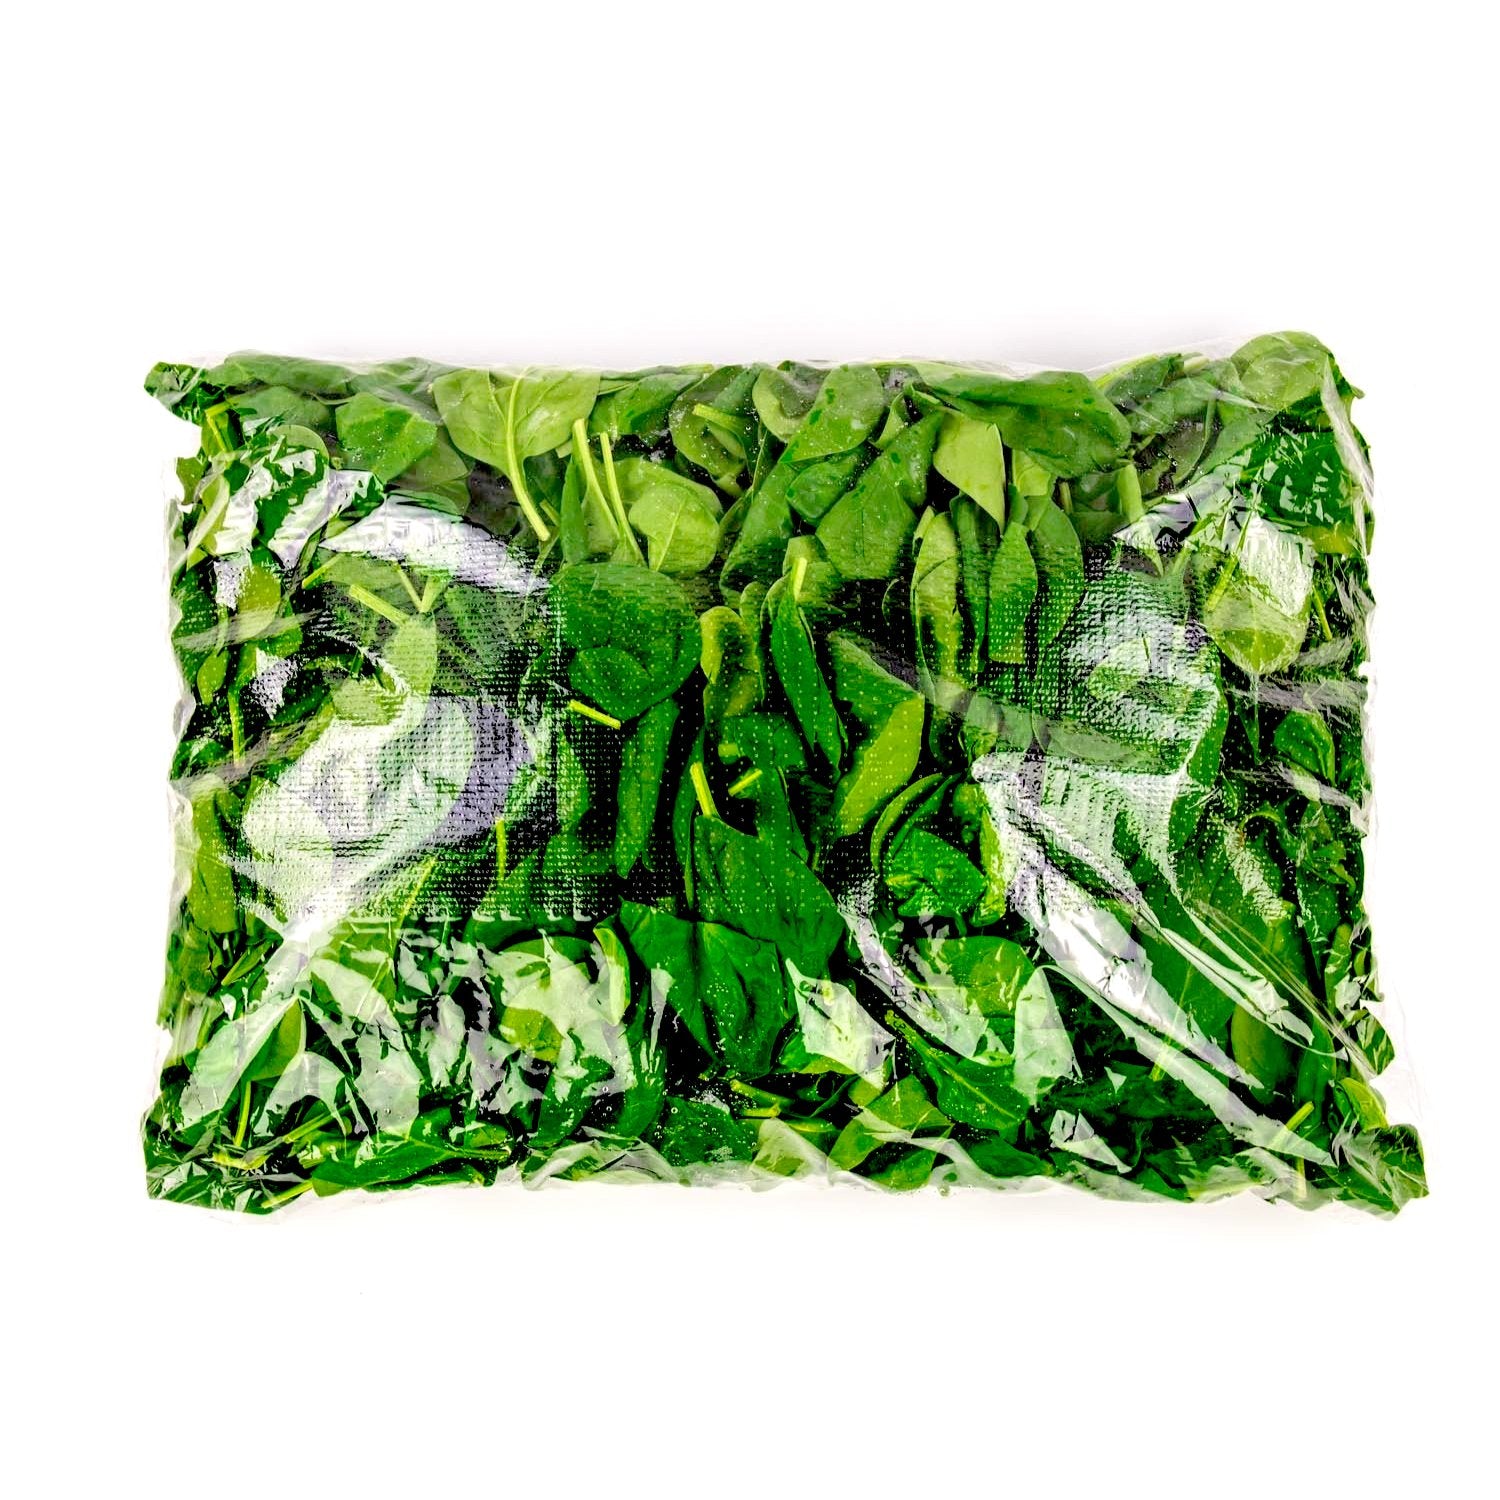 2LBS Bag - Baby Spinach